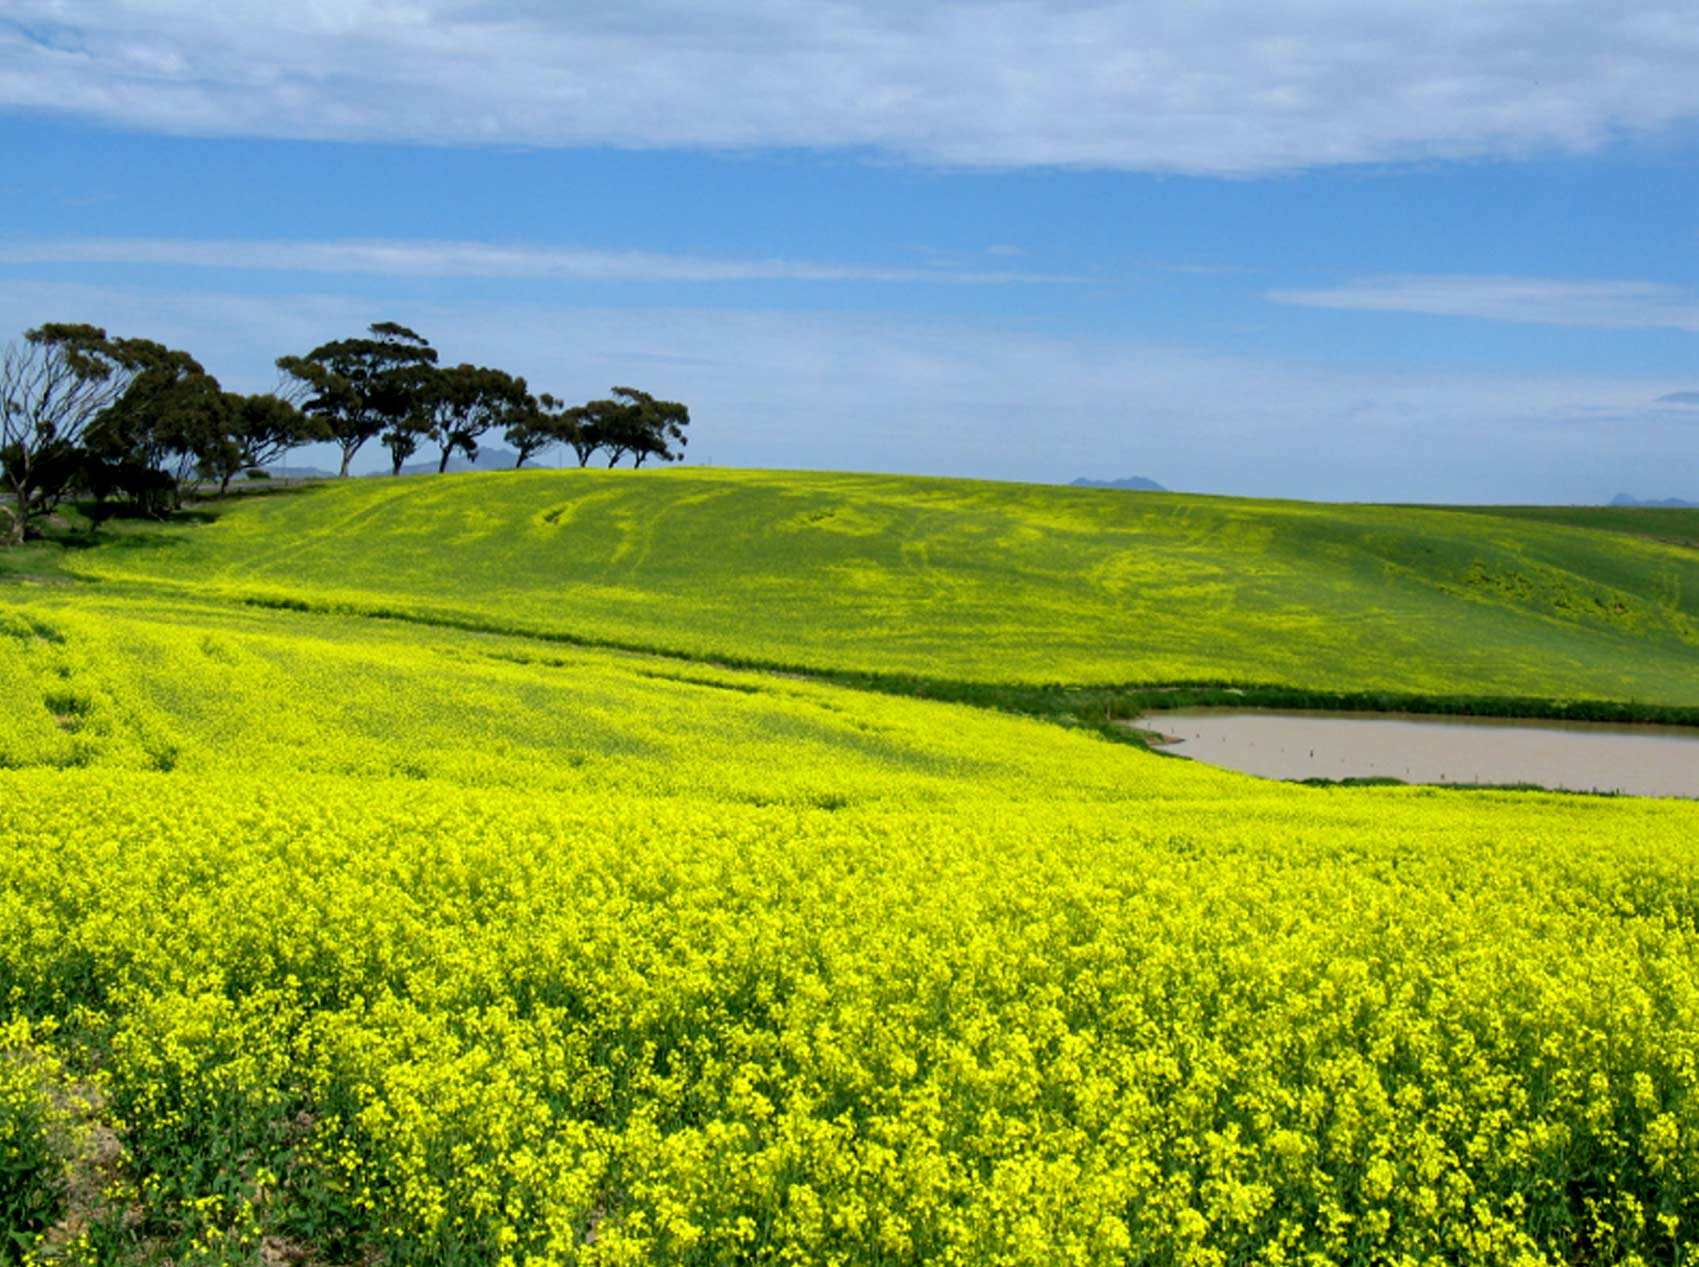 Canola Fields in the Overberg